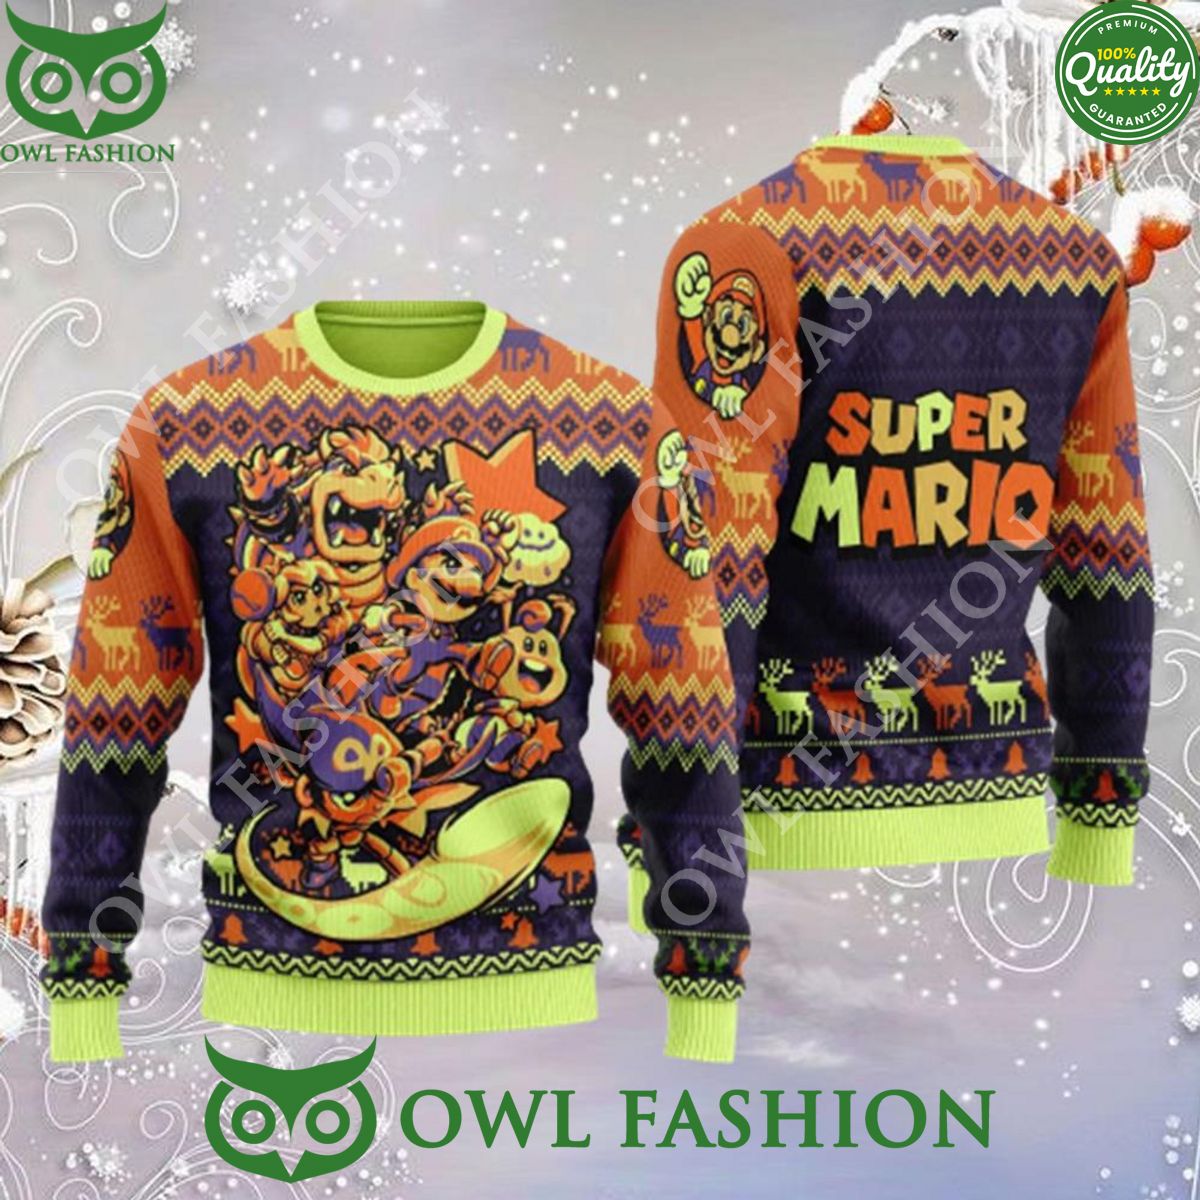 Super Mario Unisex Ugly Sweater Jumper Looking so nice